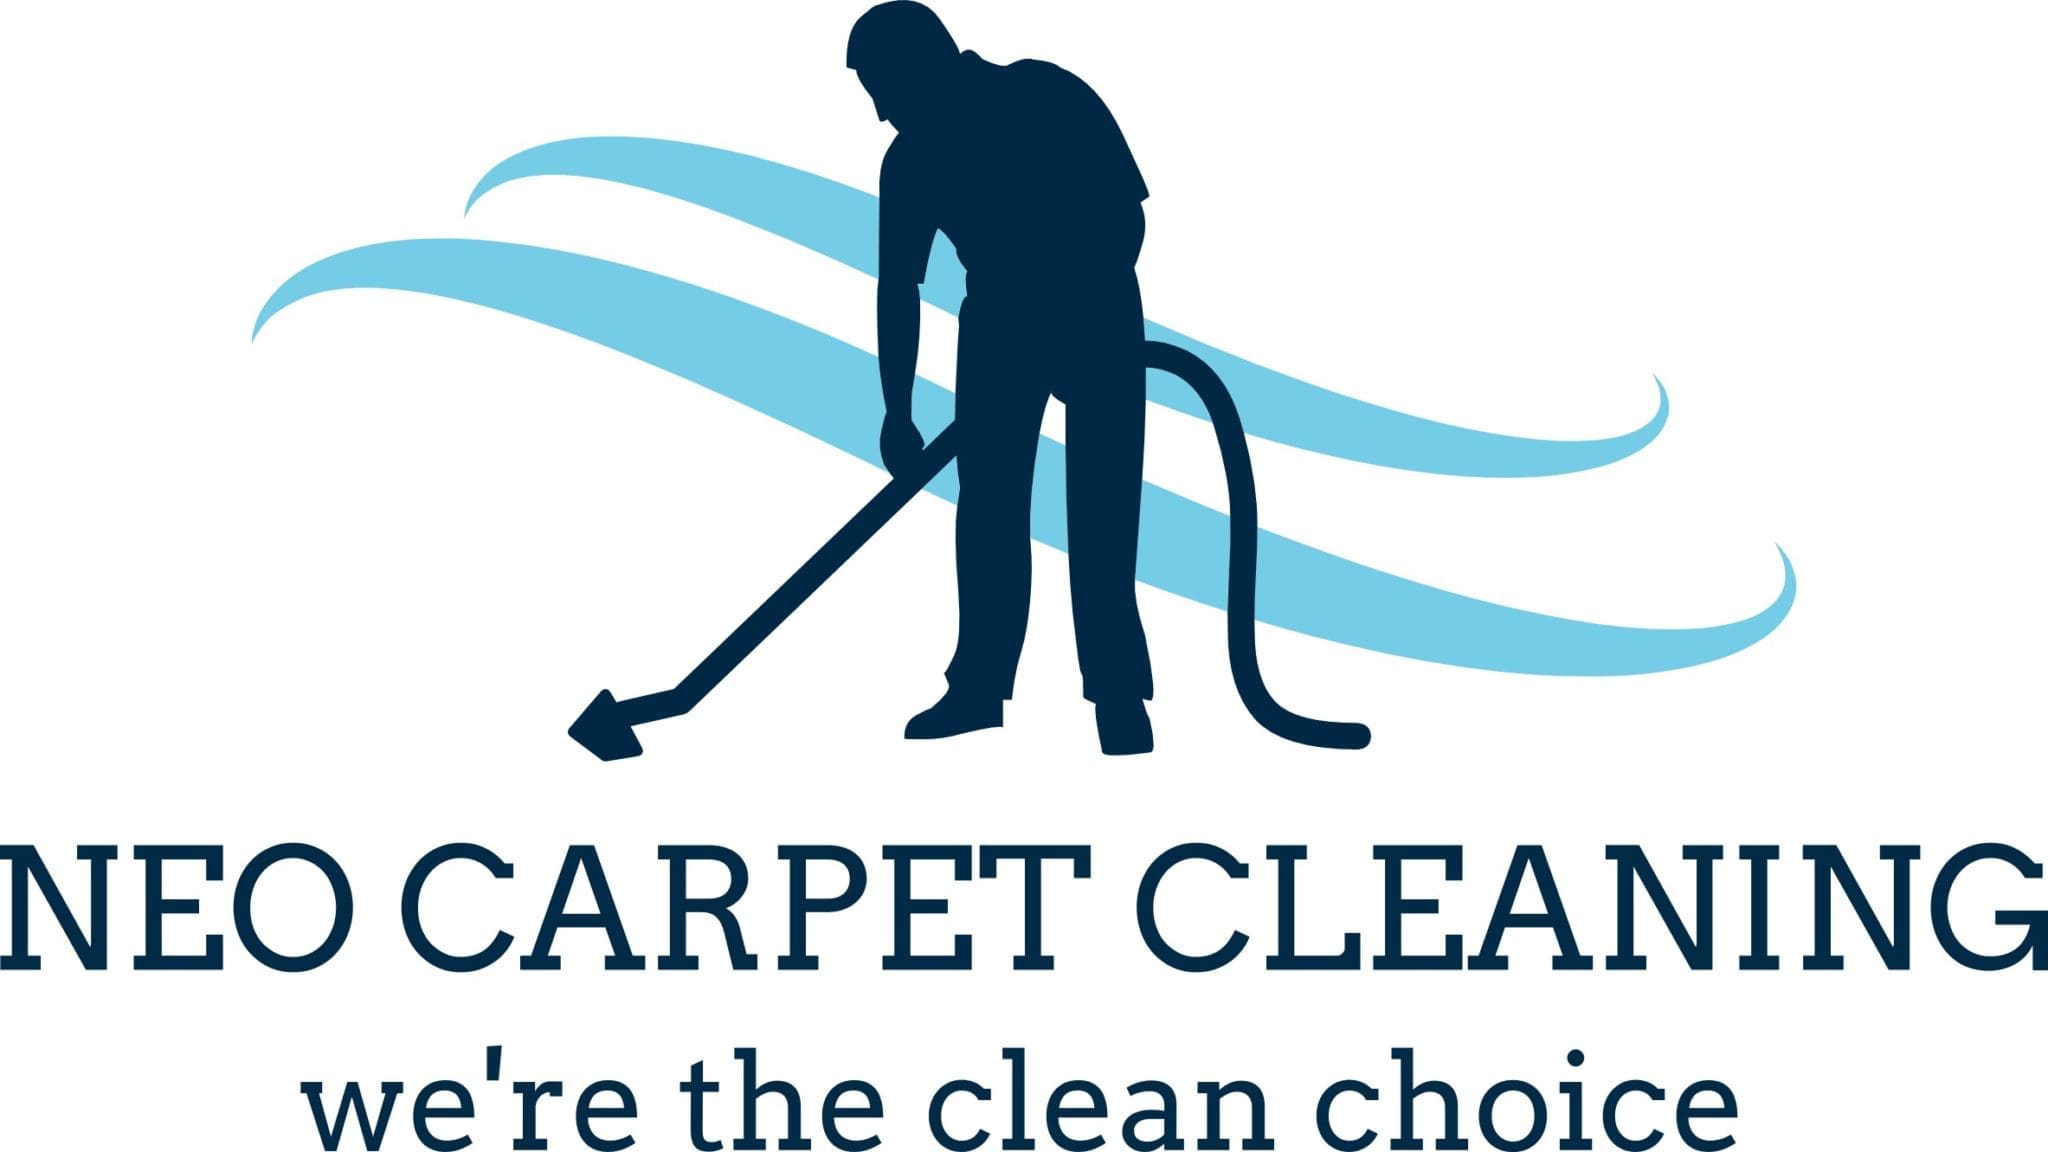 NEO CARPET CLEANING